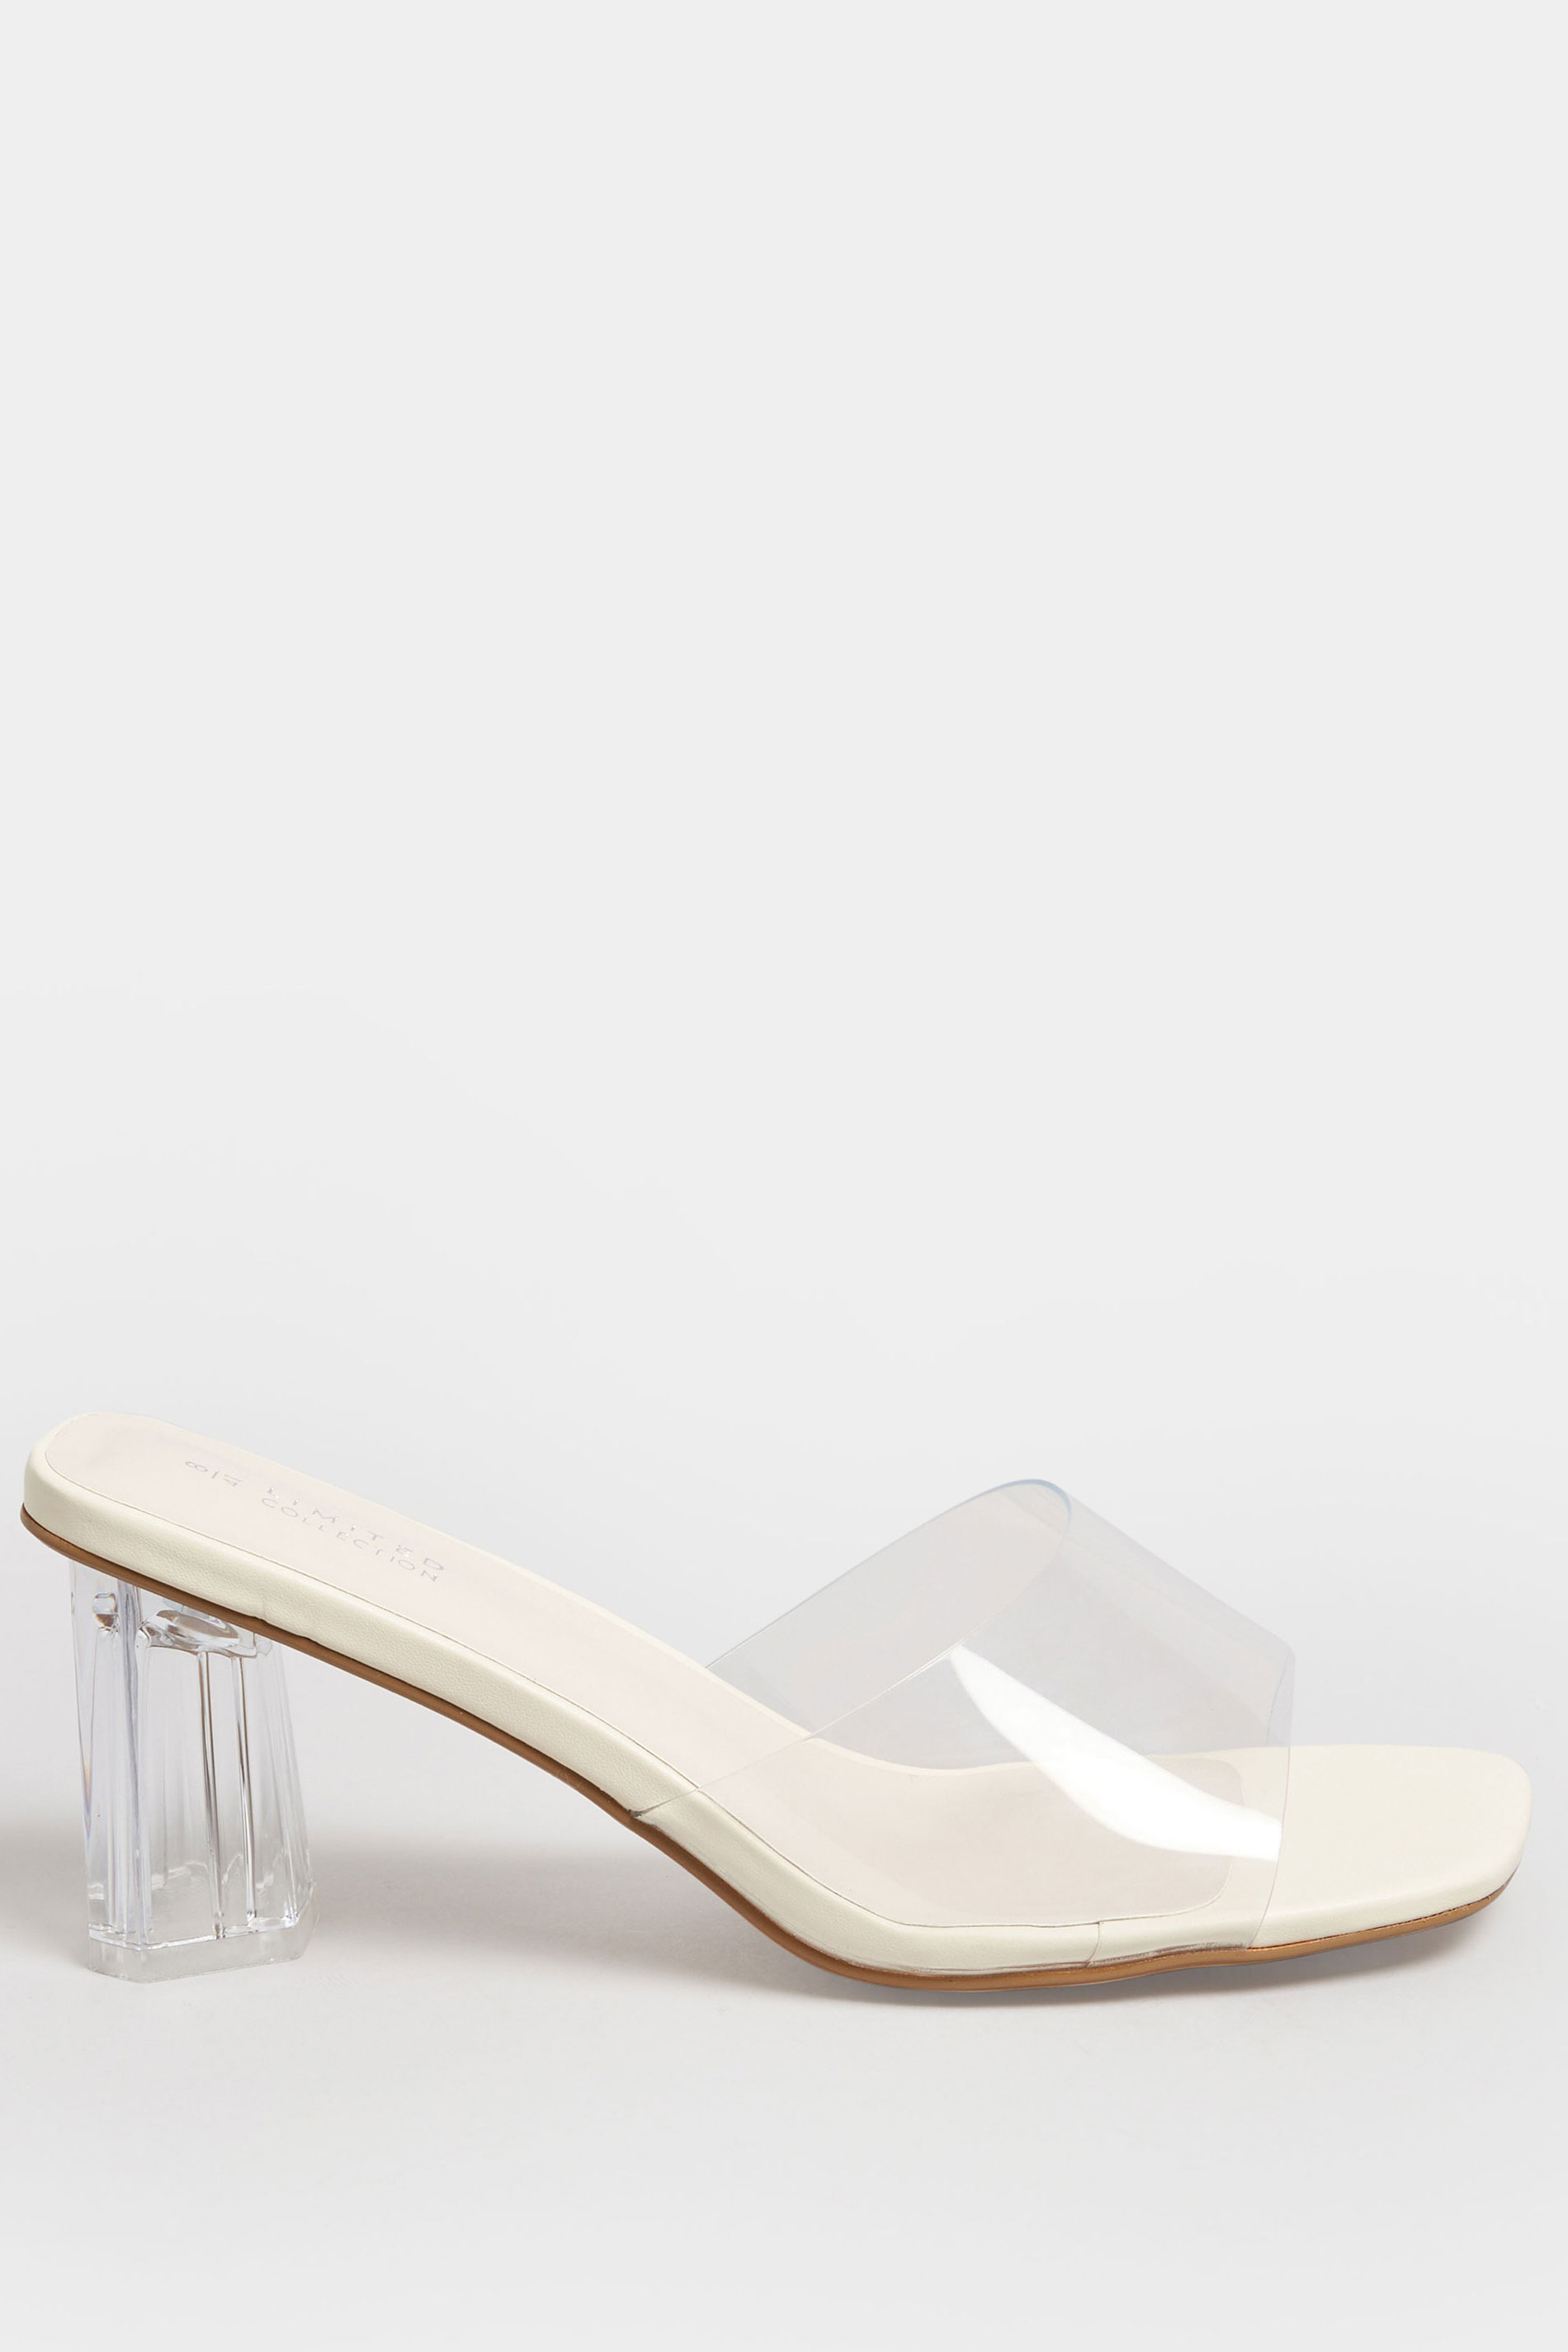 LIMITED COLLECTION White & Clear Block Heel Mules In Extra Wide EEE Fit | Yours Clothing 3